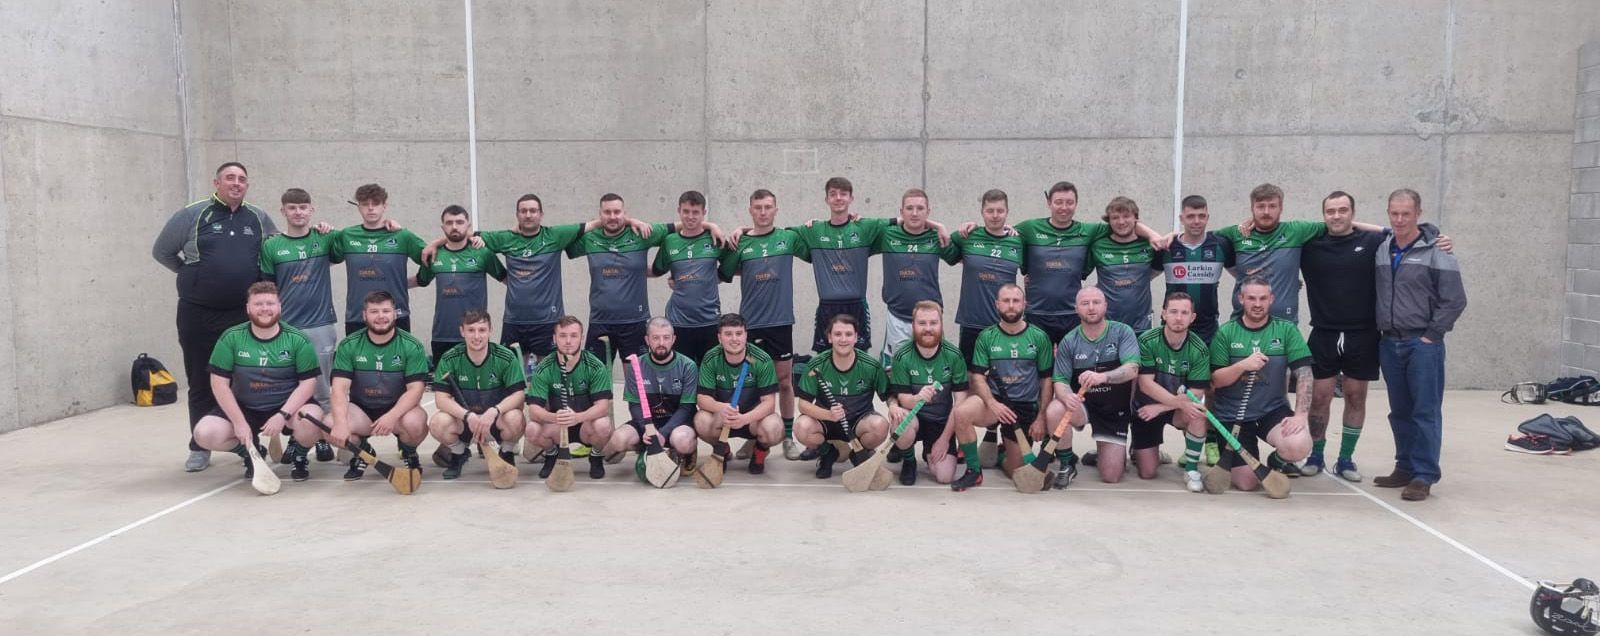 The Henry Joy’s hurlers have been waiting for the green light to take to the field for competitive action